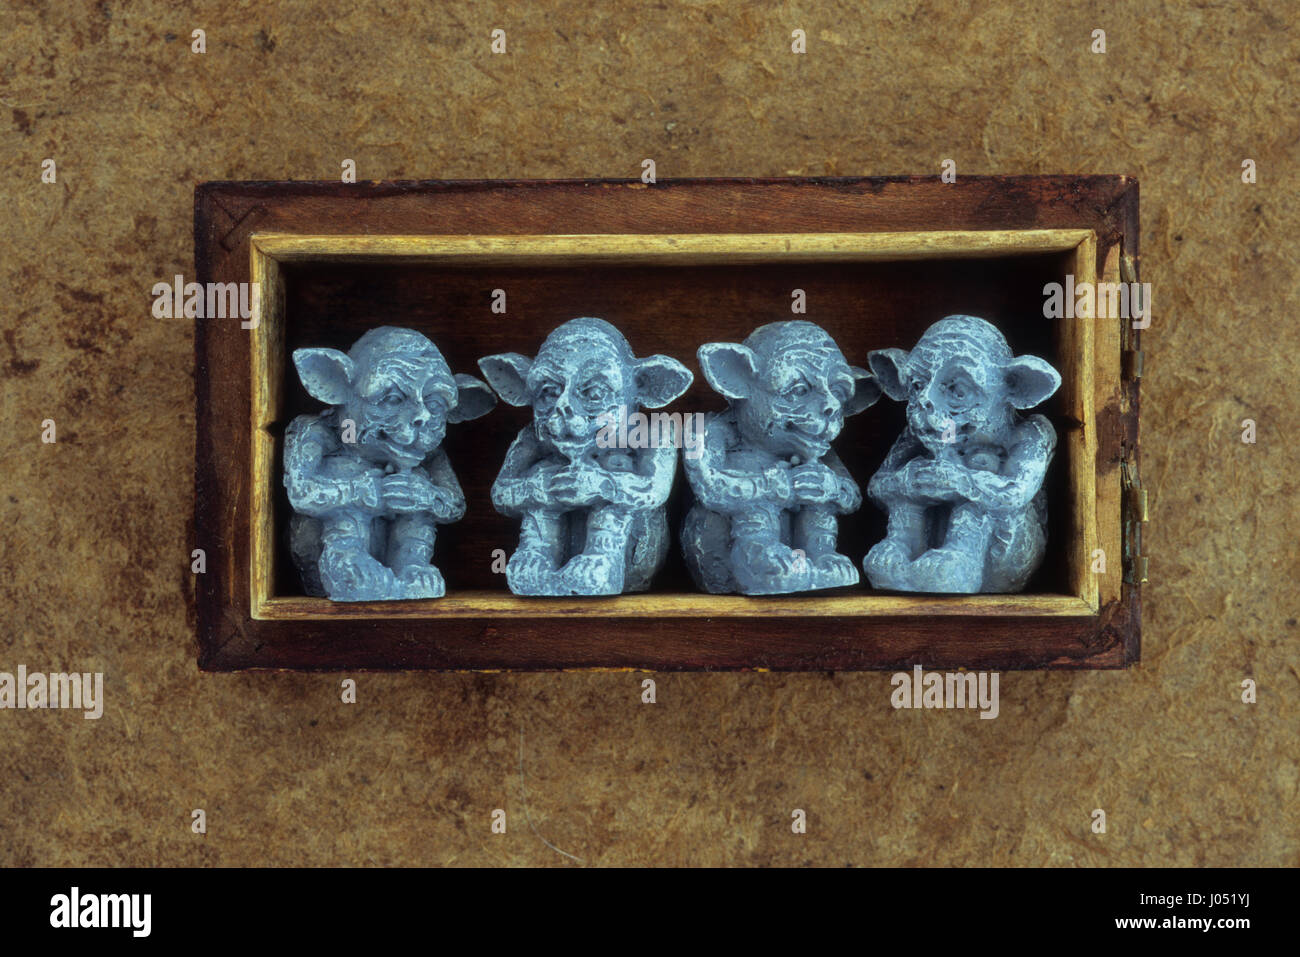 Two pairs of grey seated goblins sitting in conversation in small wooden box Stock Photo